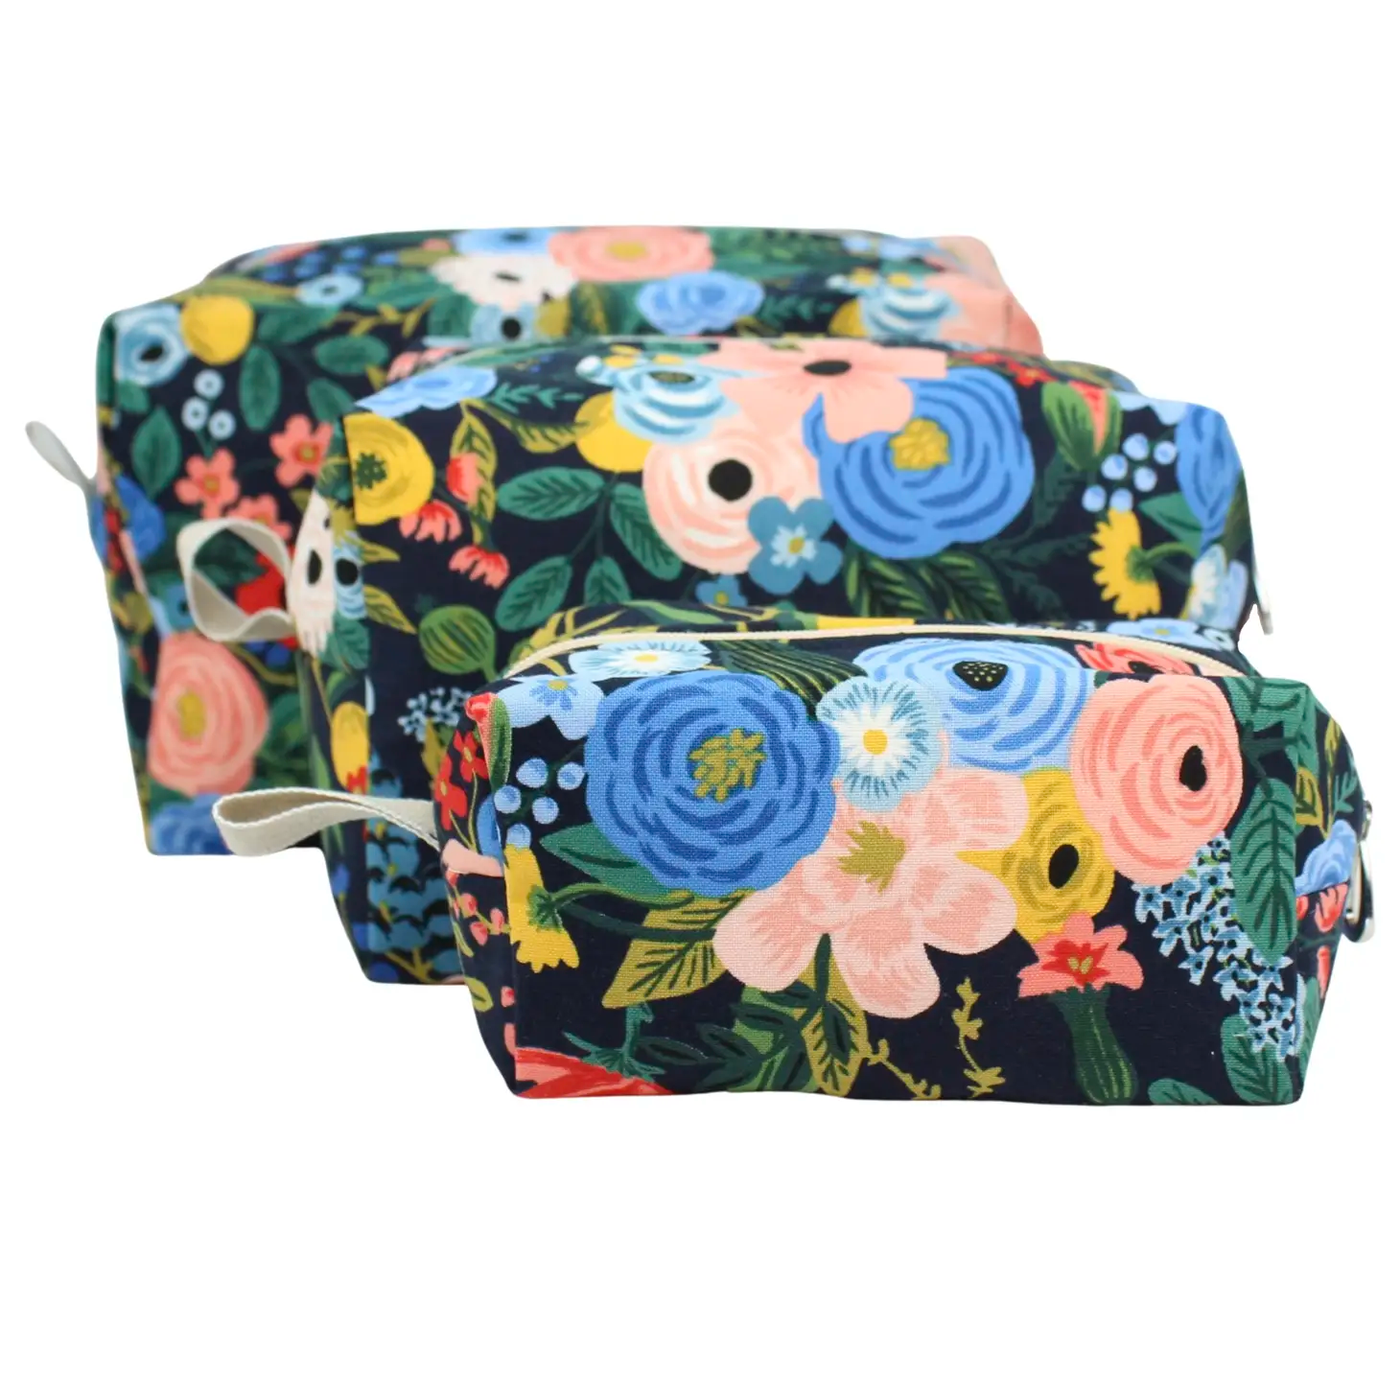 TOILETRY BAG NAVY FLORAL (Available in 3 Sizes)